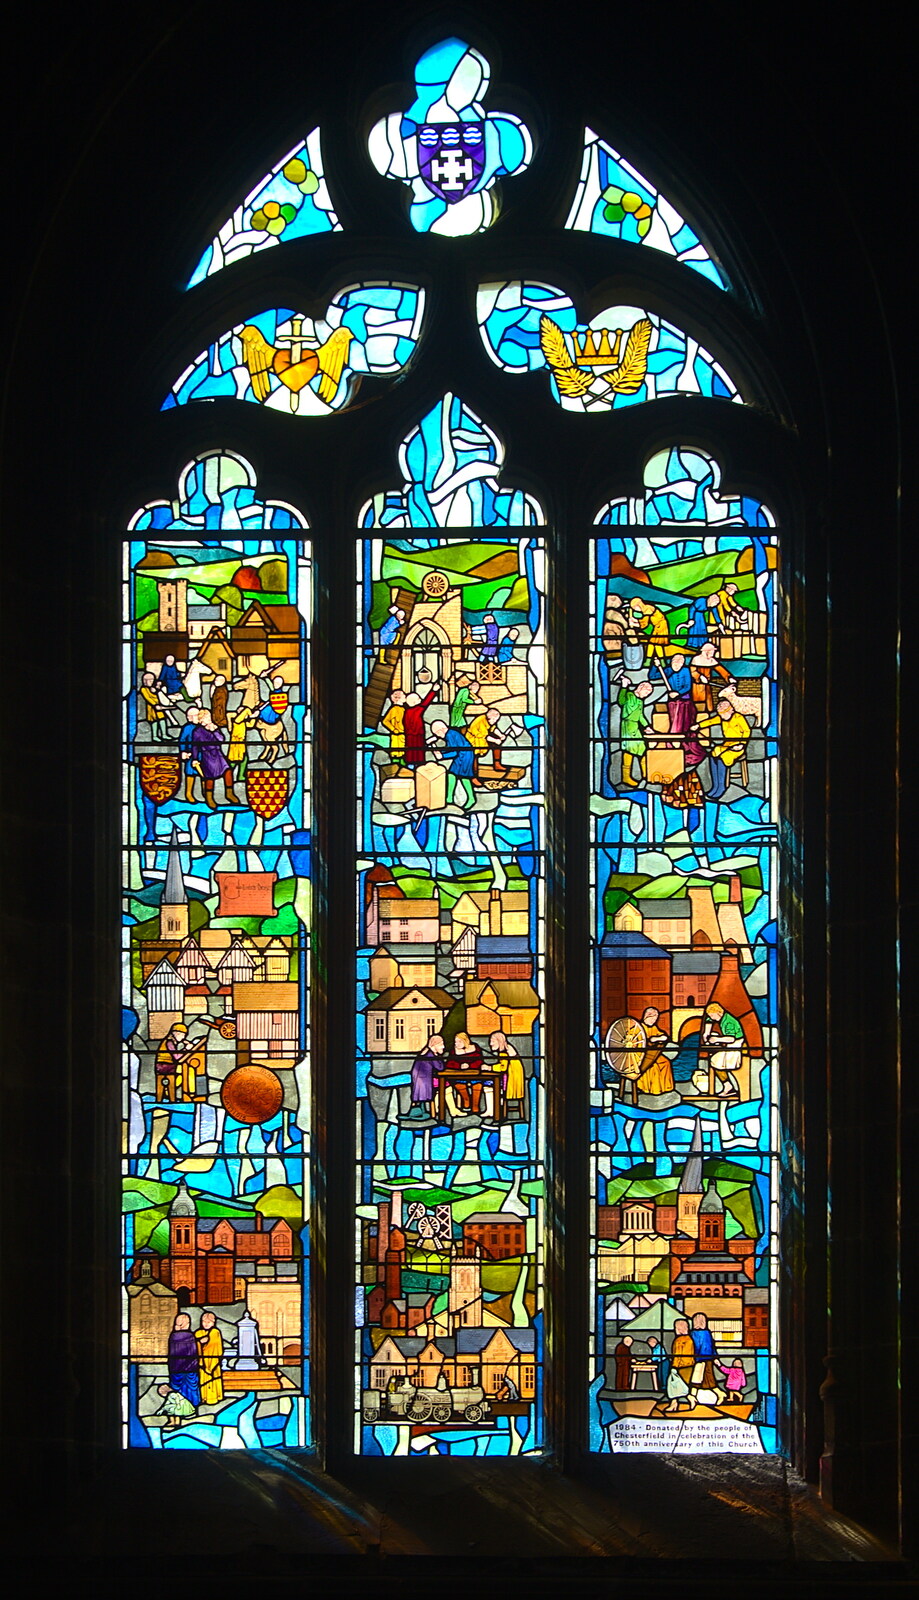 More stained glass, dated 1984 from Chesterfield and the Twisty Spire, Derbyshire - 19th April 2013